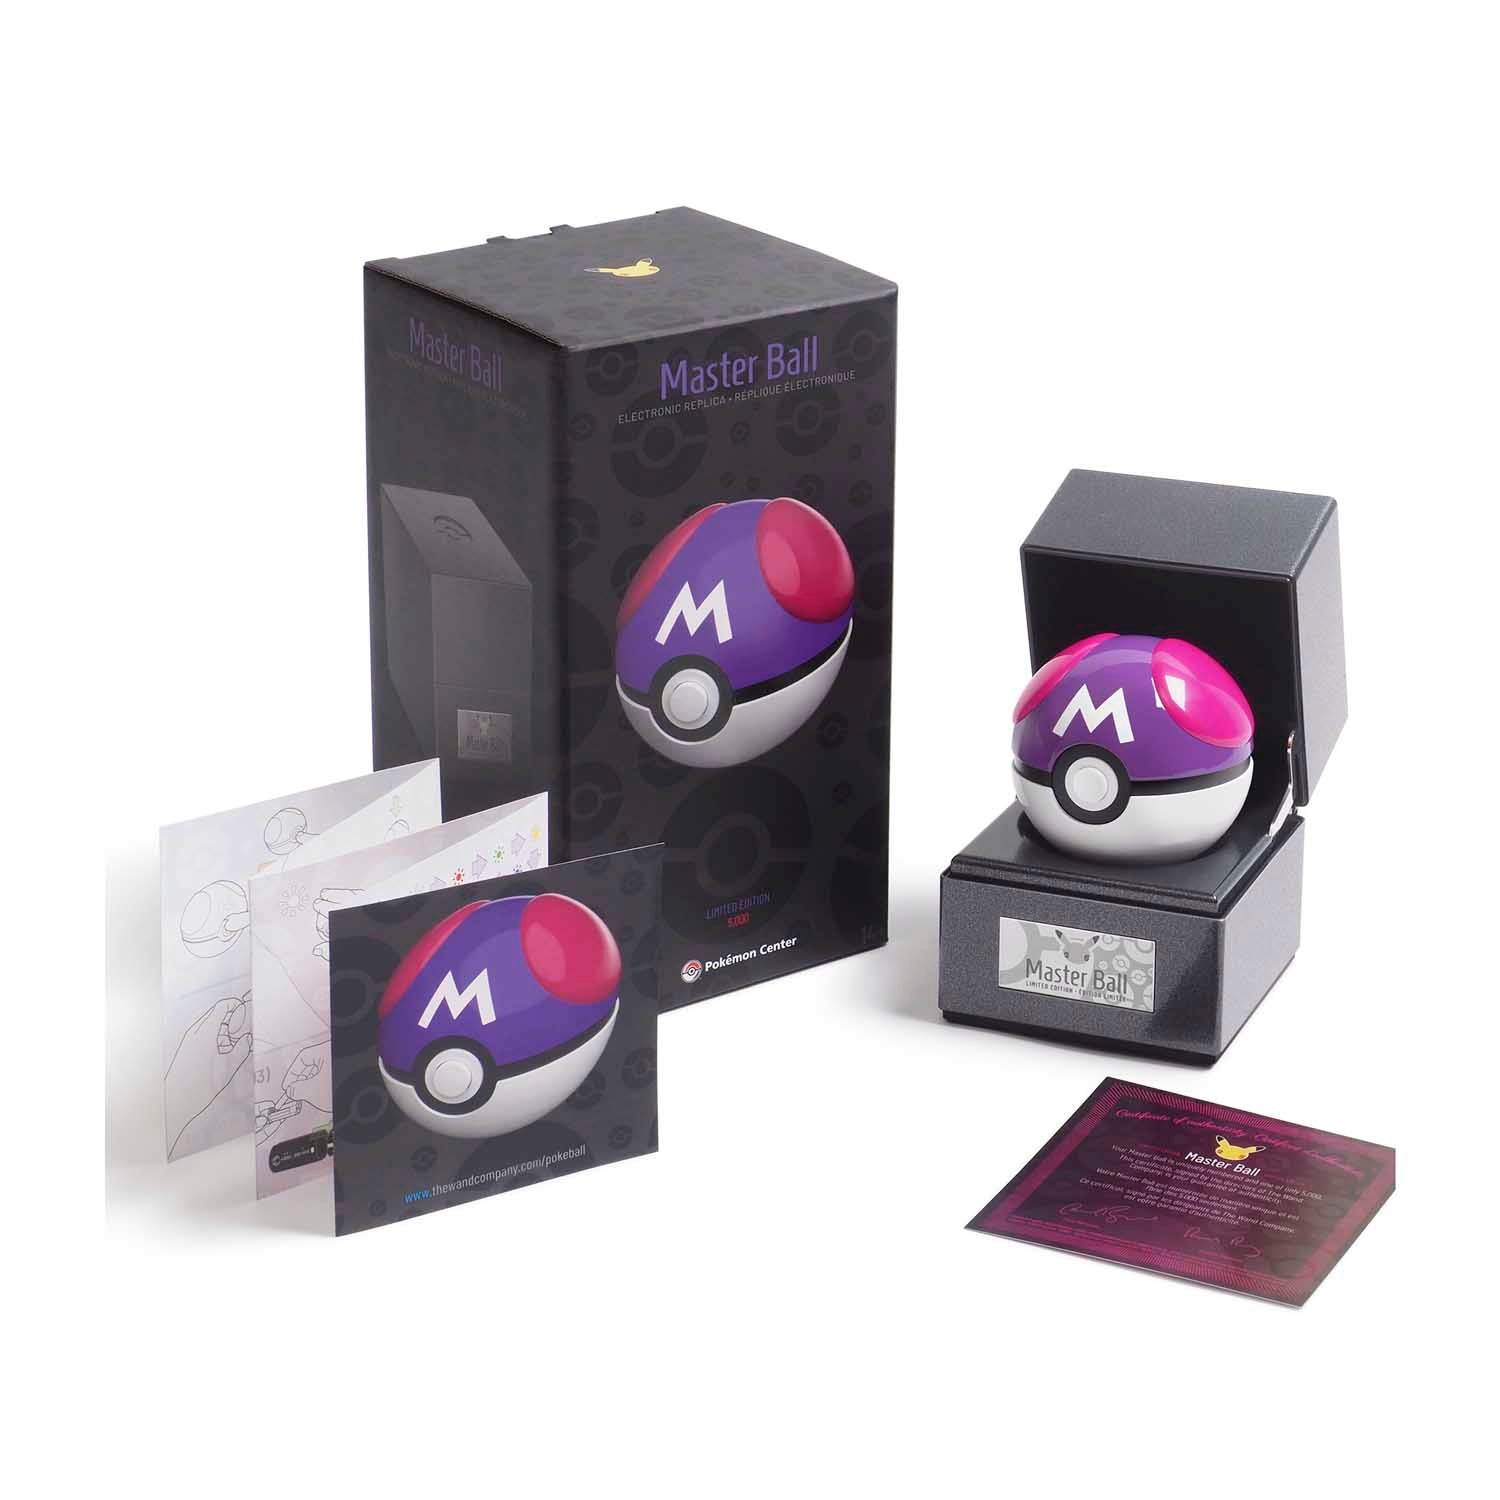 Master Ball by The Wand Company (LE 5000) – Product Sage Collectibles